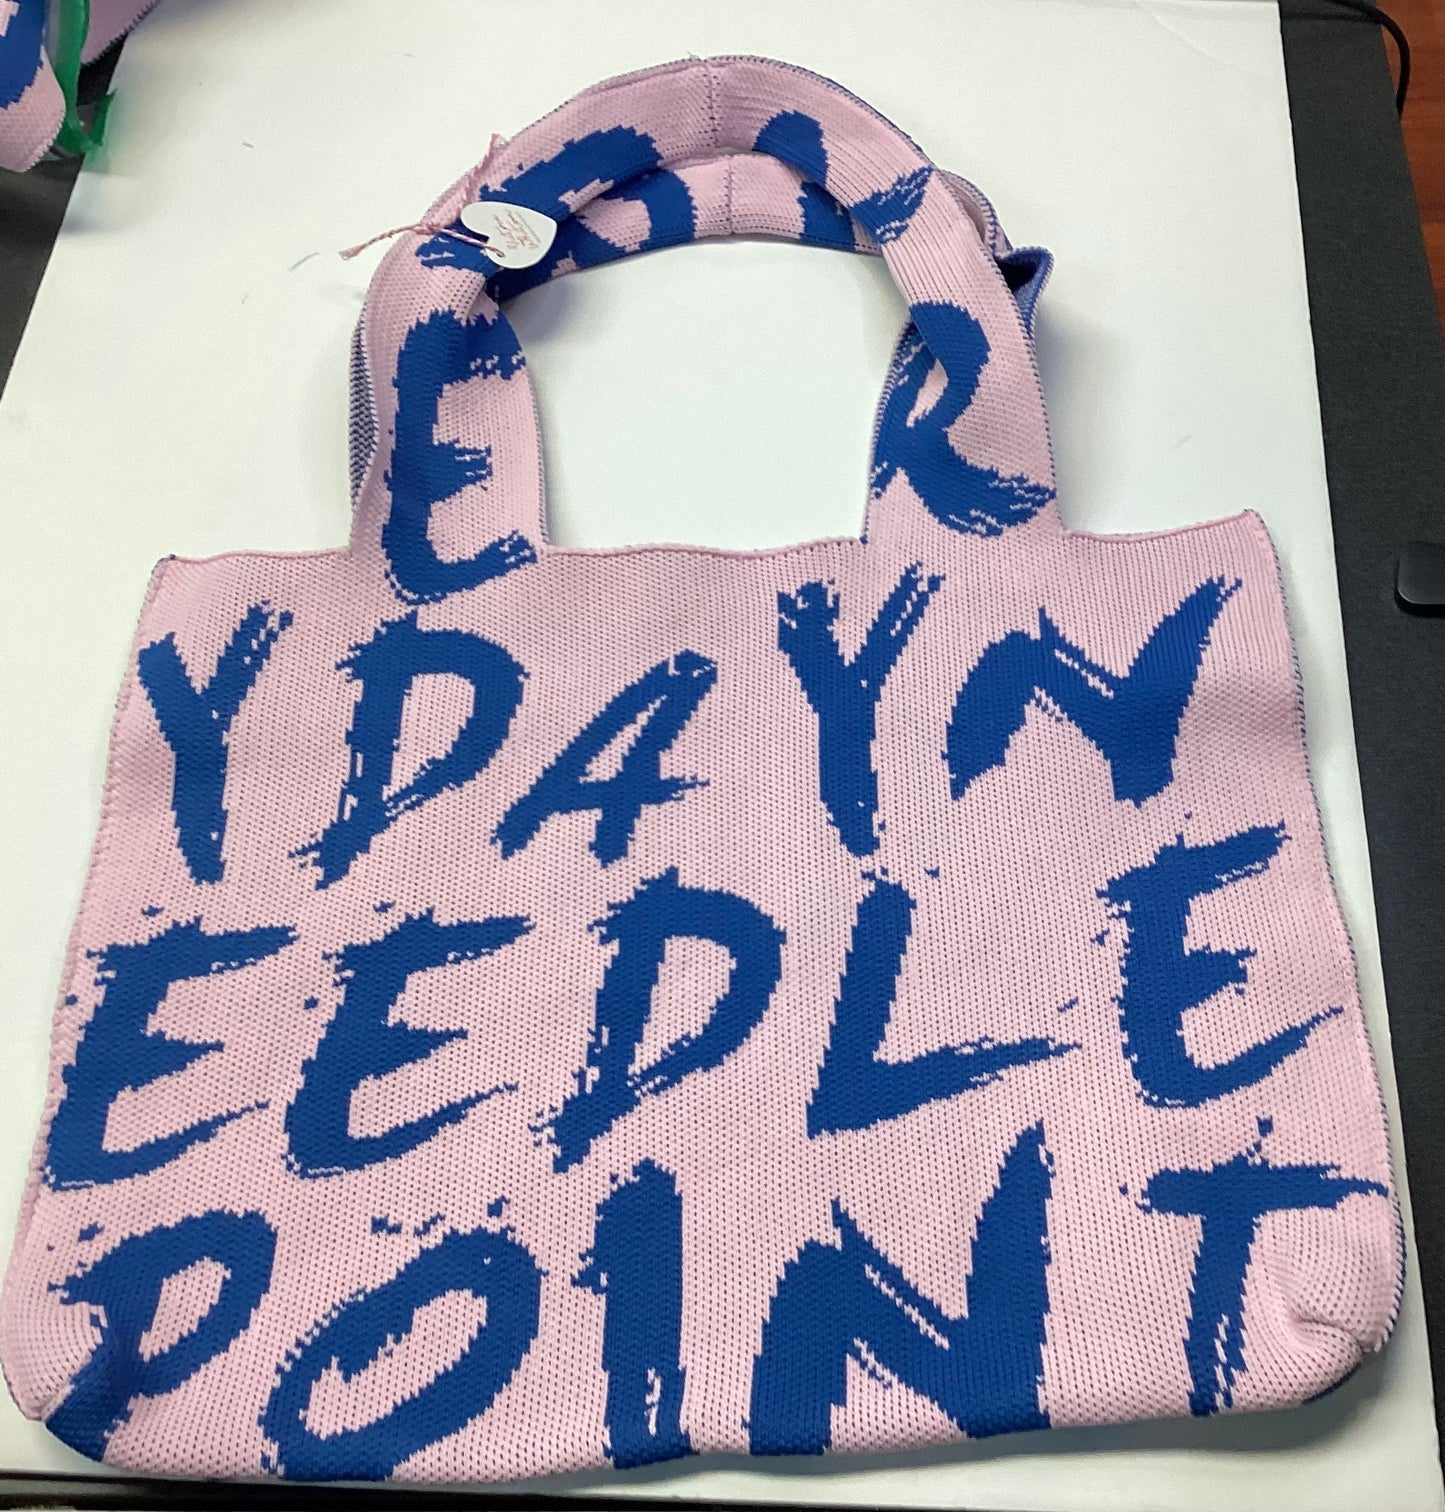 VW Everday Knit pink tote with navy letters